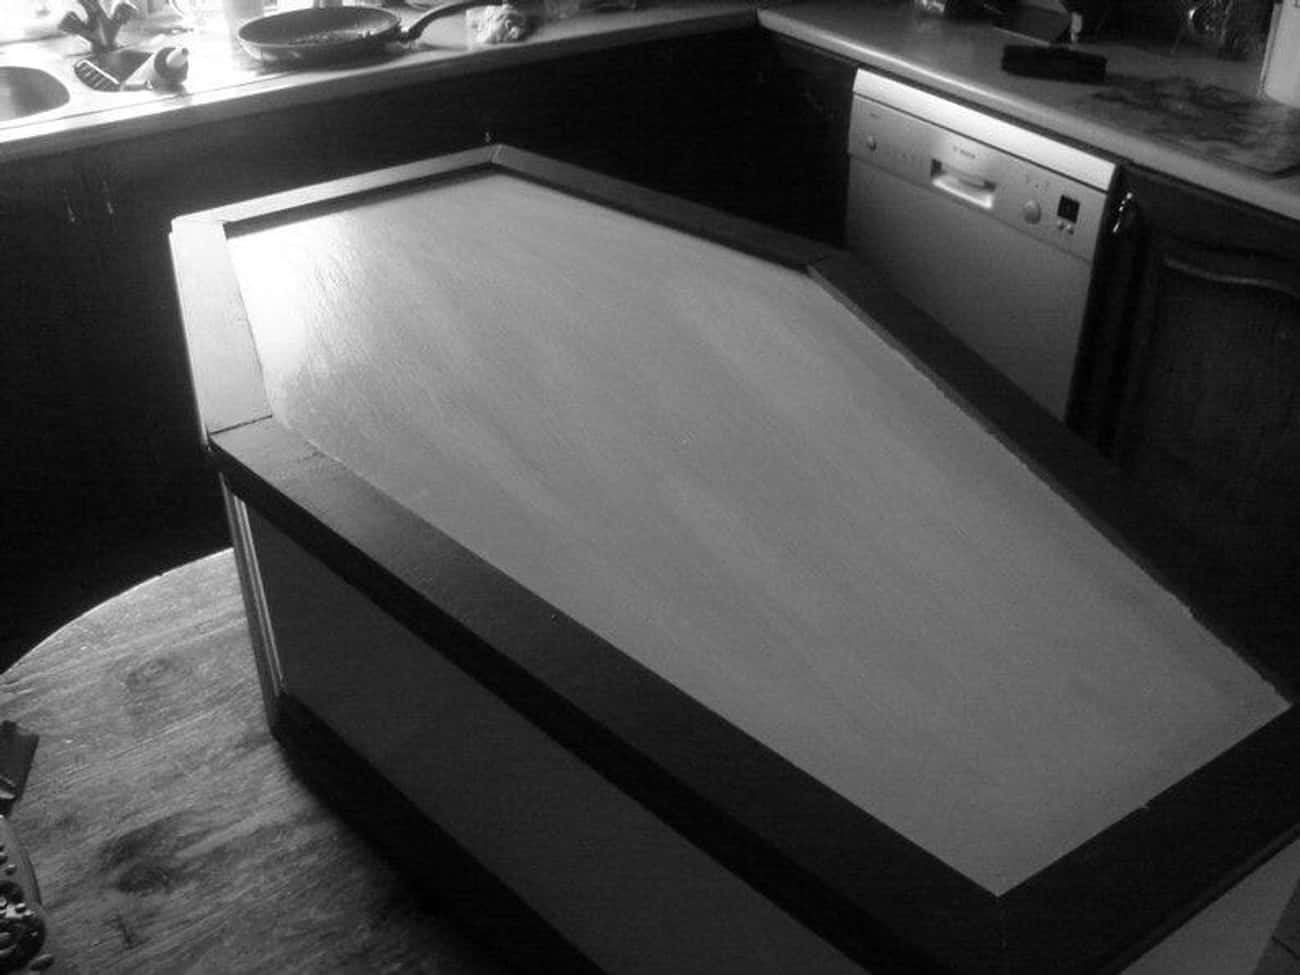 A Man's Body Was Found In A Homemade Coffin Alongside His Mother's Remains